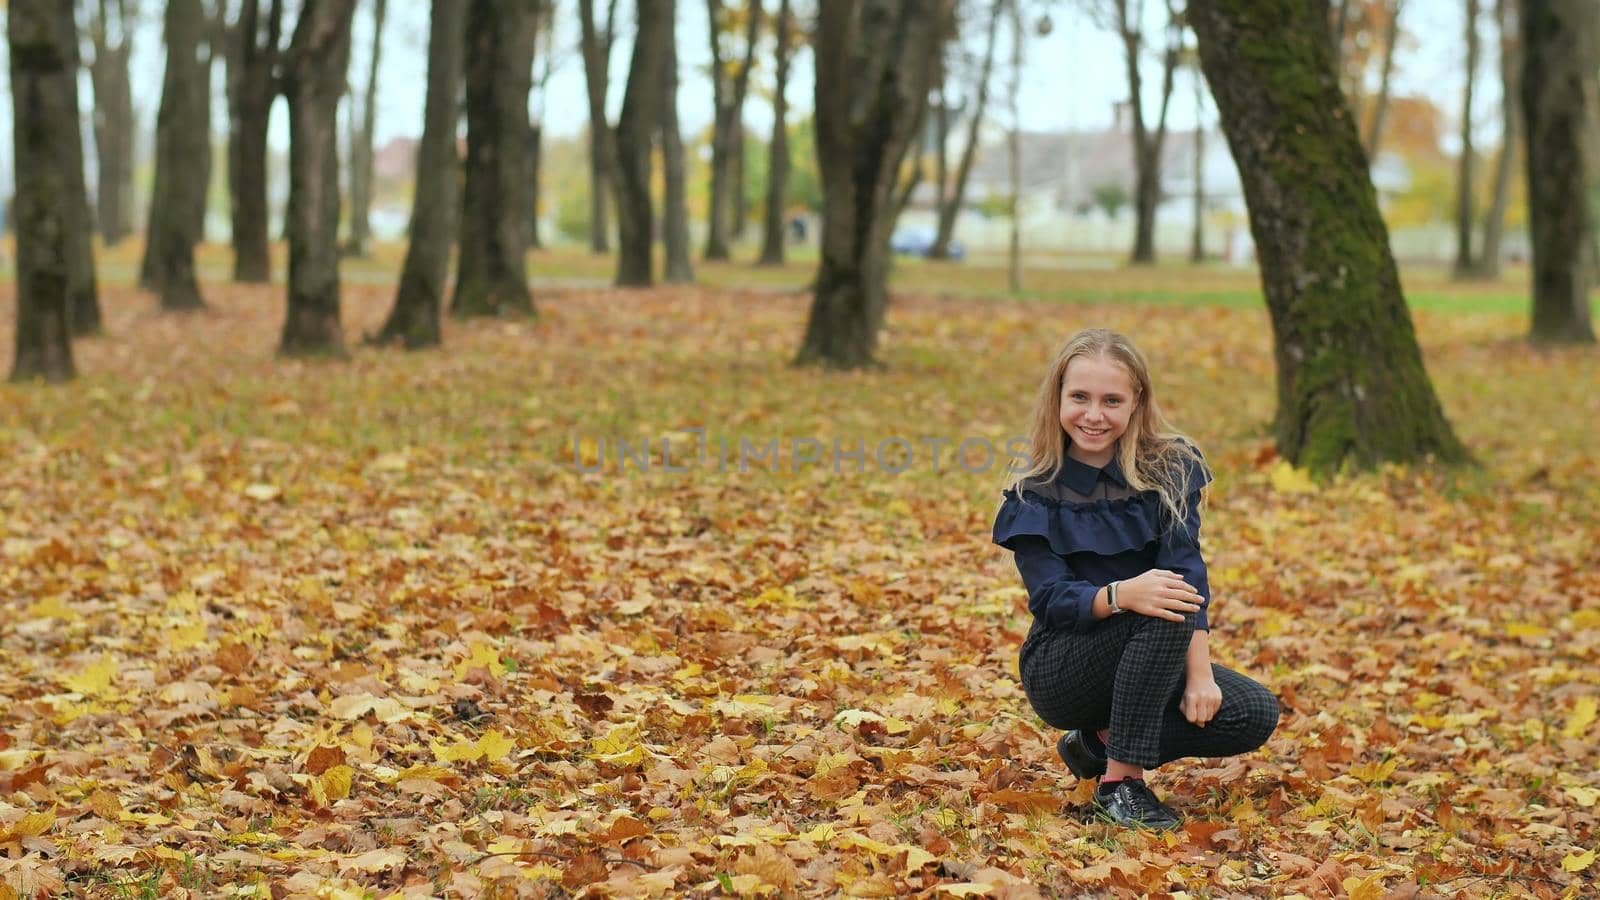 A teenage girl is sitting in an autumn park